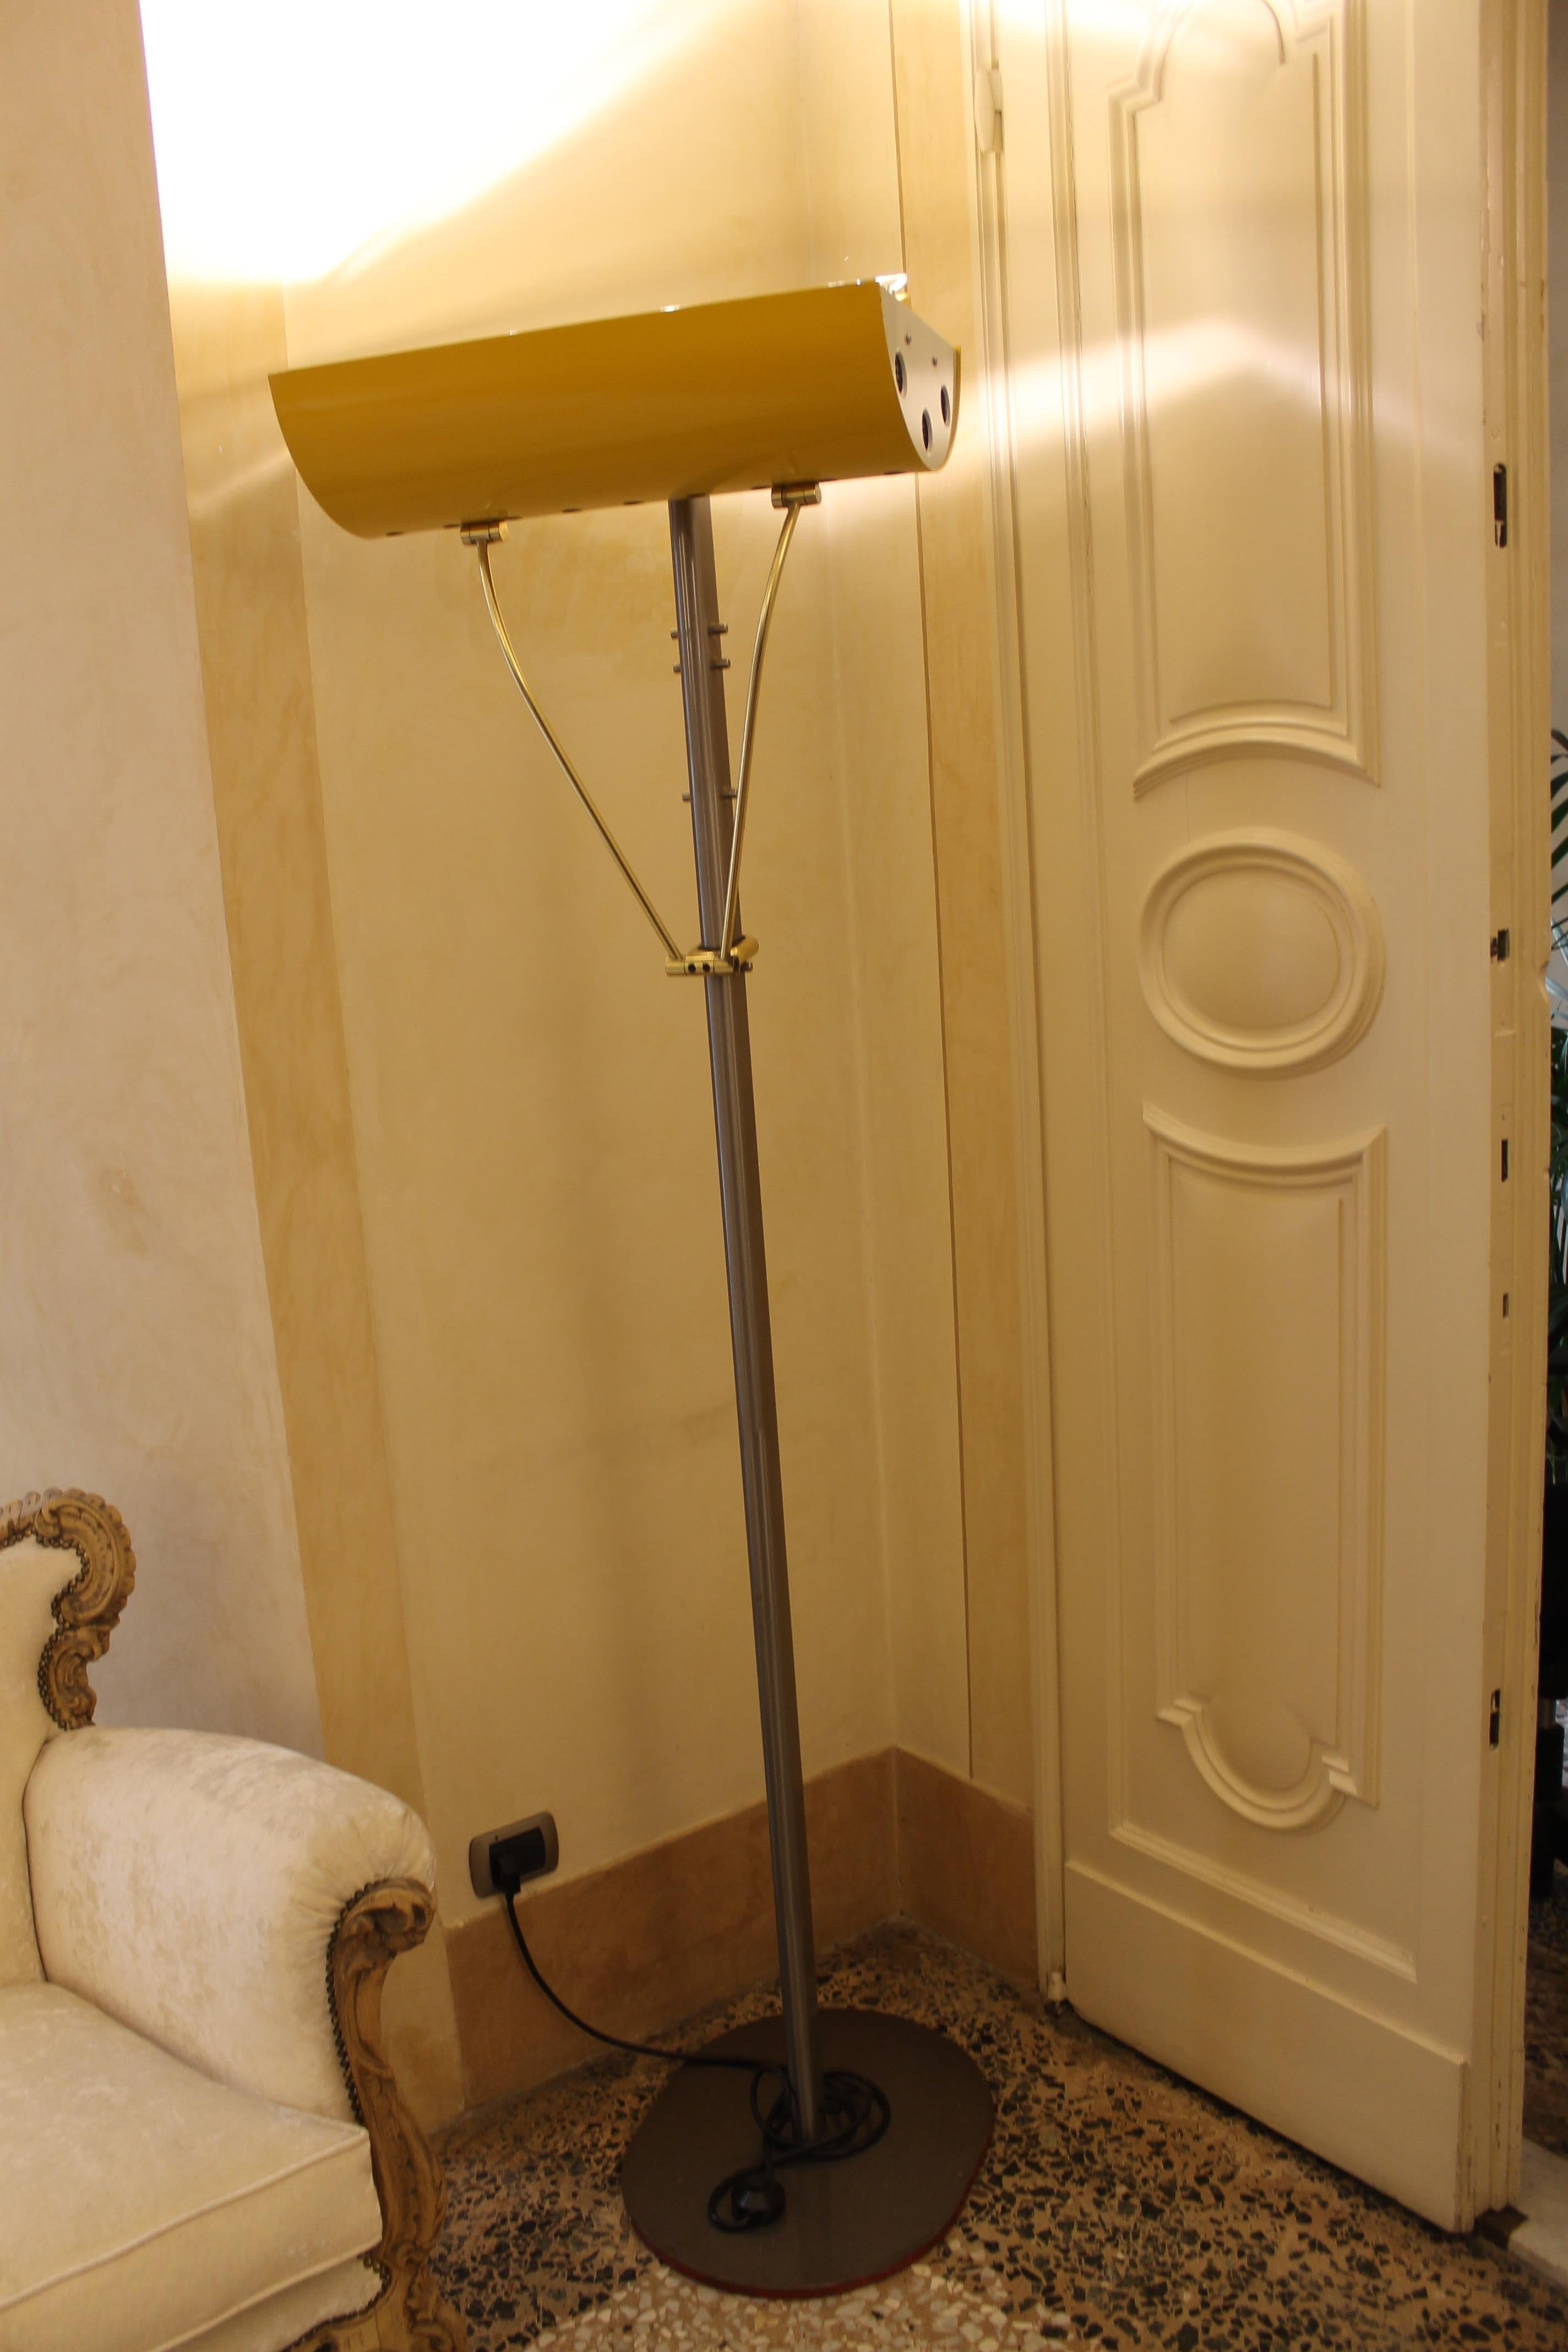 Pair of Afra and Tobia Scarpa yellow floor lamps for the Saleroom of Benetton in Florence, Italy 1980 ca.

Another pair in green color available.

